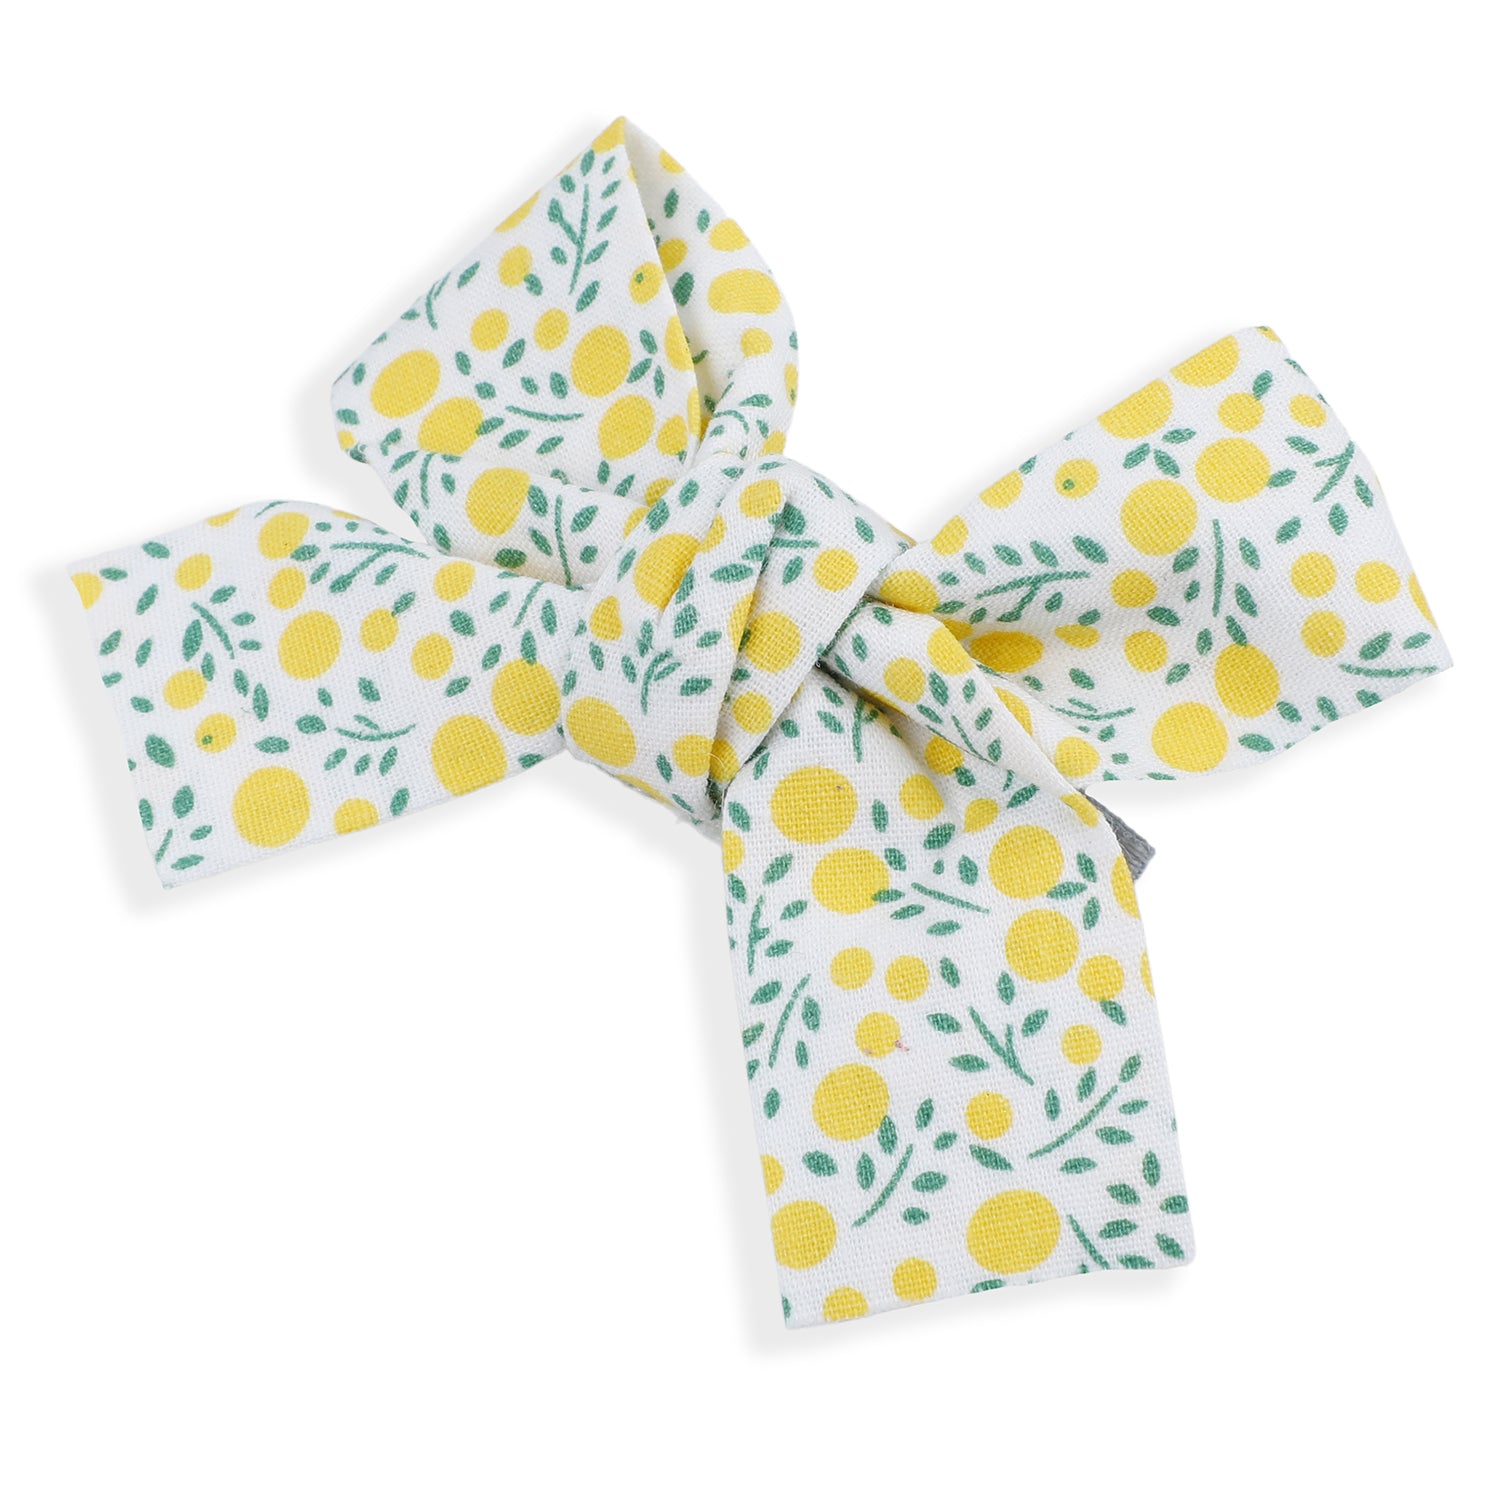 Floral Hair Bow Clip Set of 2 - Yellow - Baby Moo